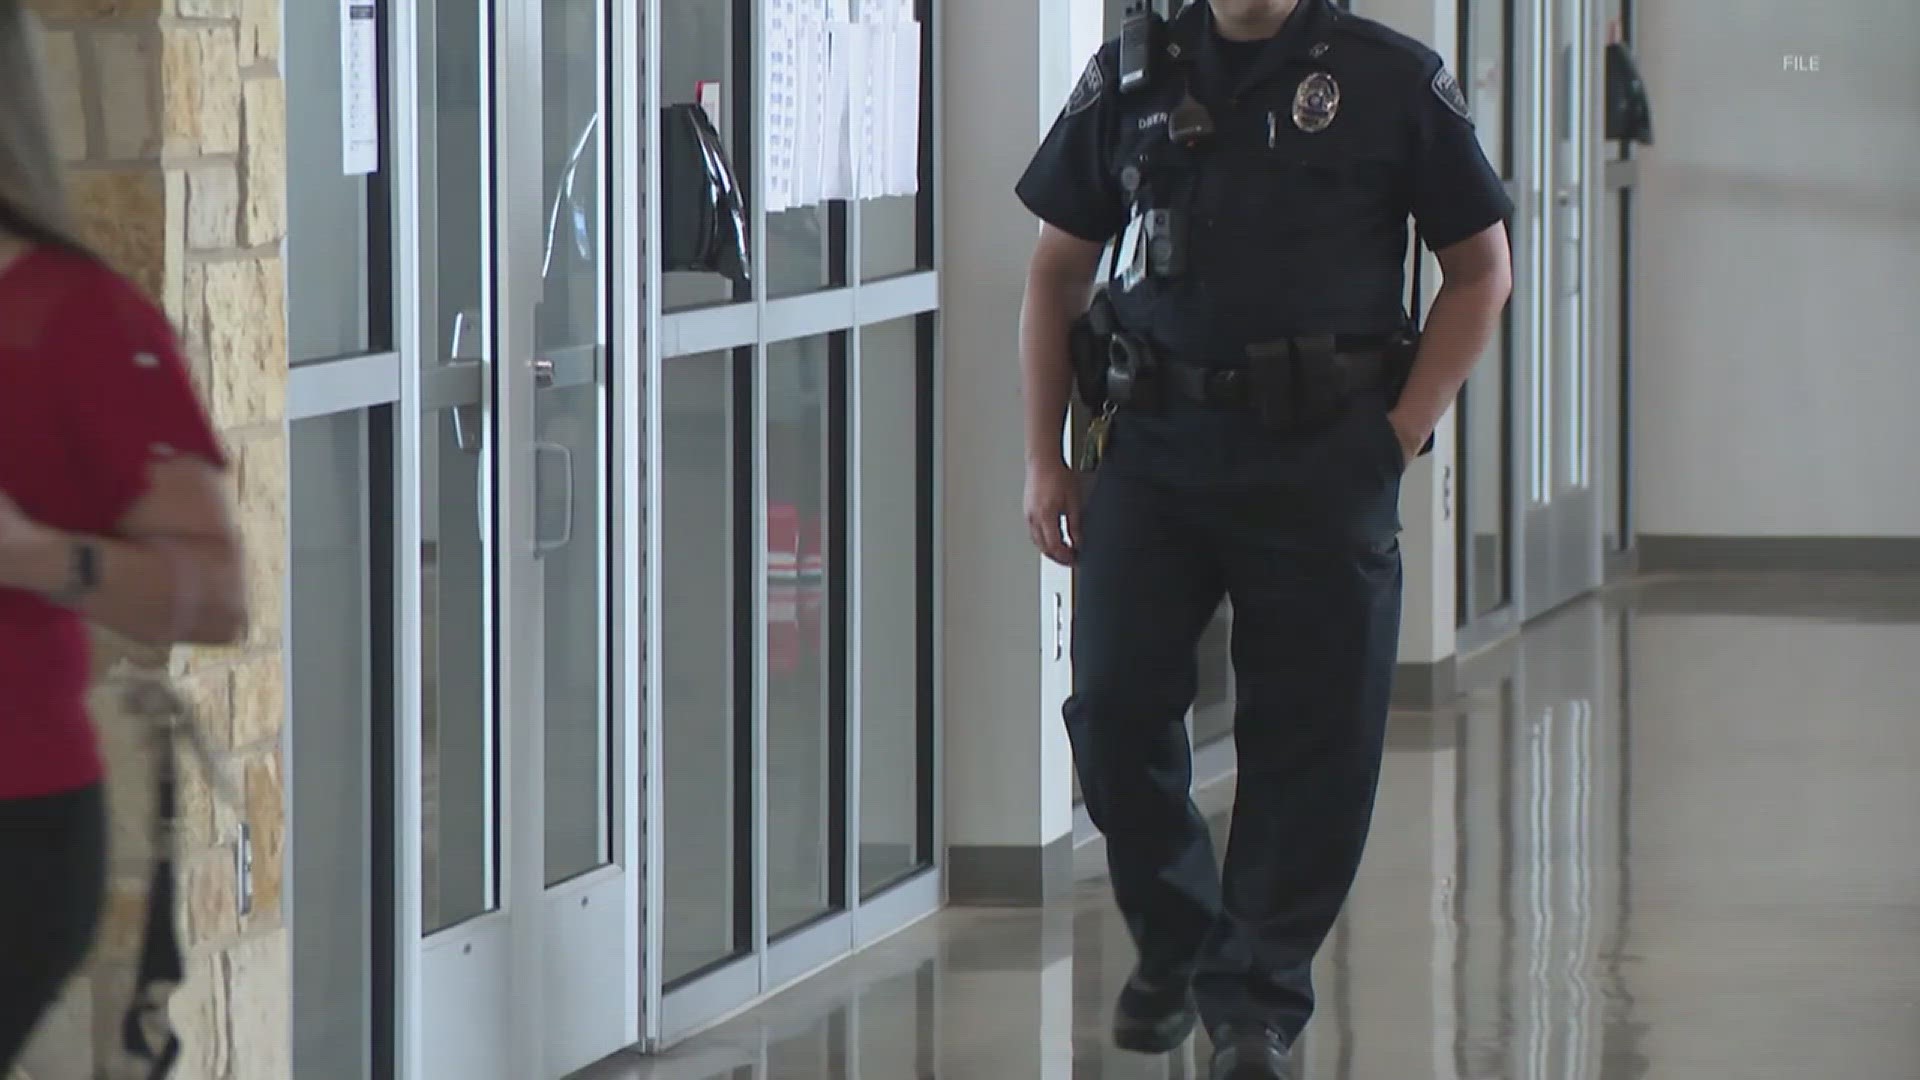 An officer with experience is preferred, but both Nederland ISD and Beaumont ISD officials aren't ruling out the possibility of arming an employee.